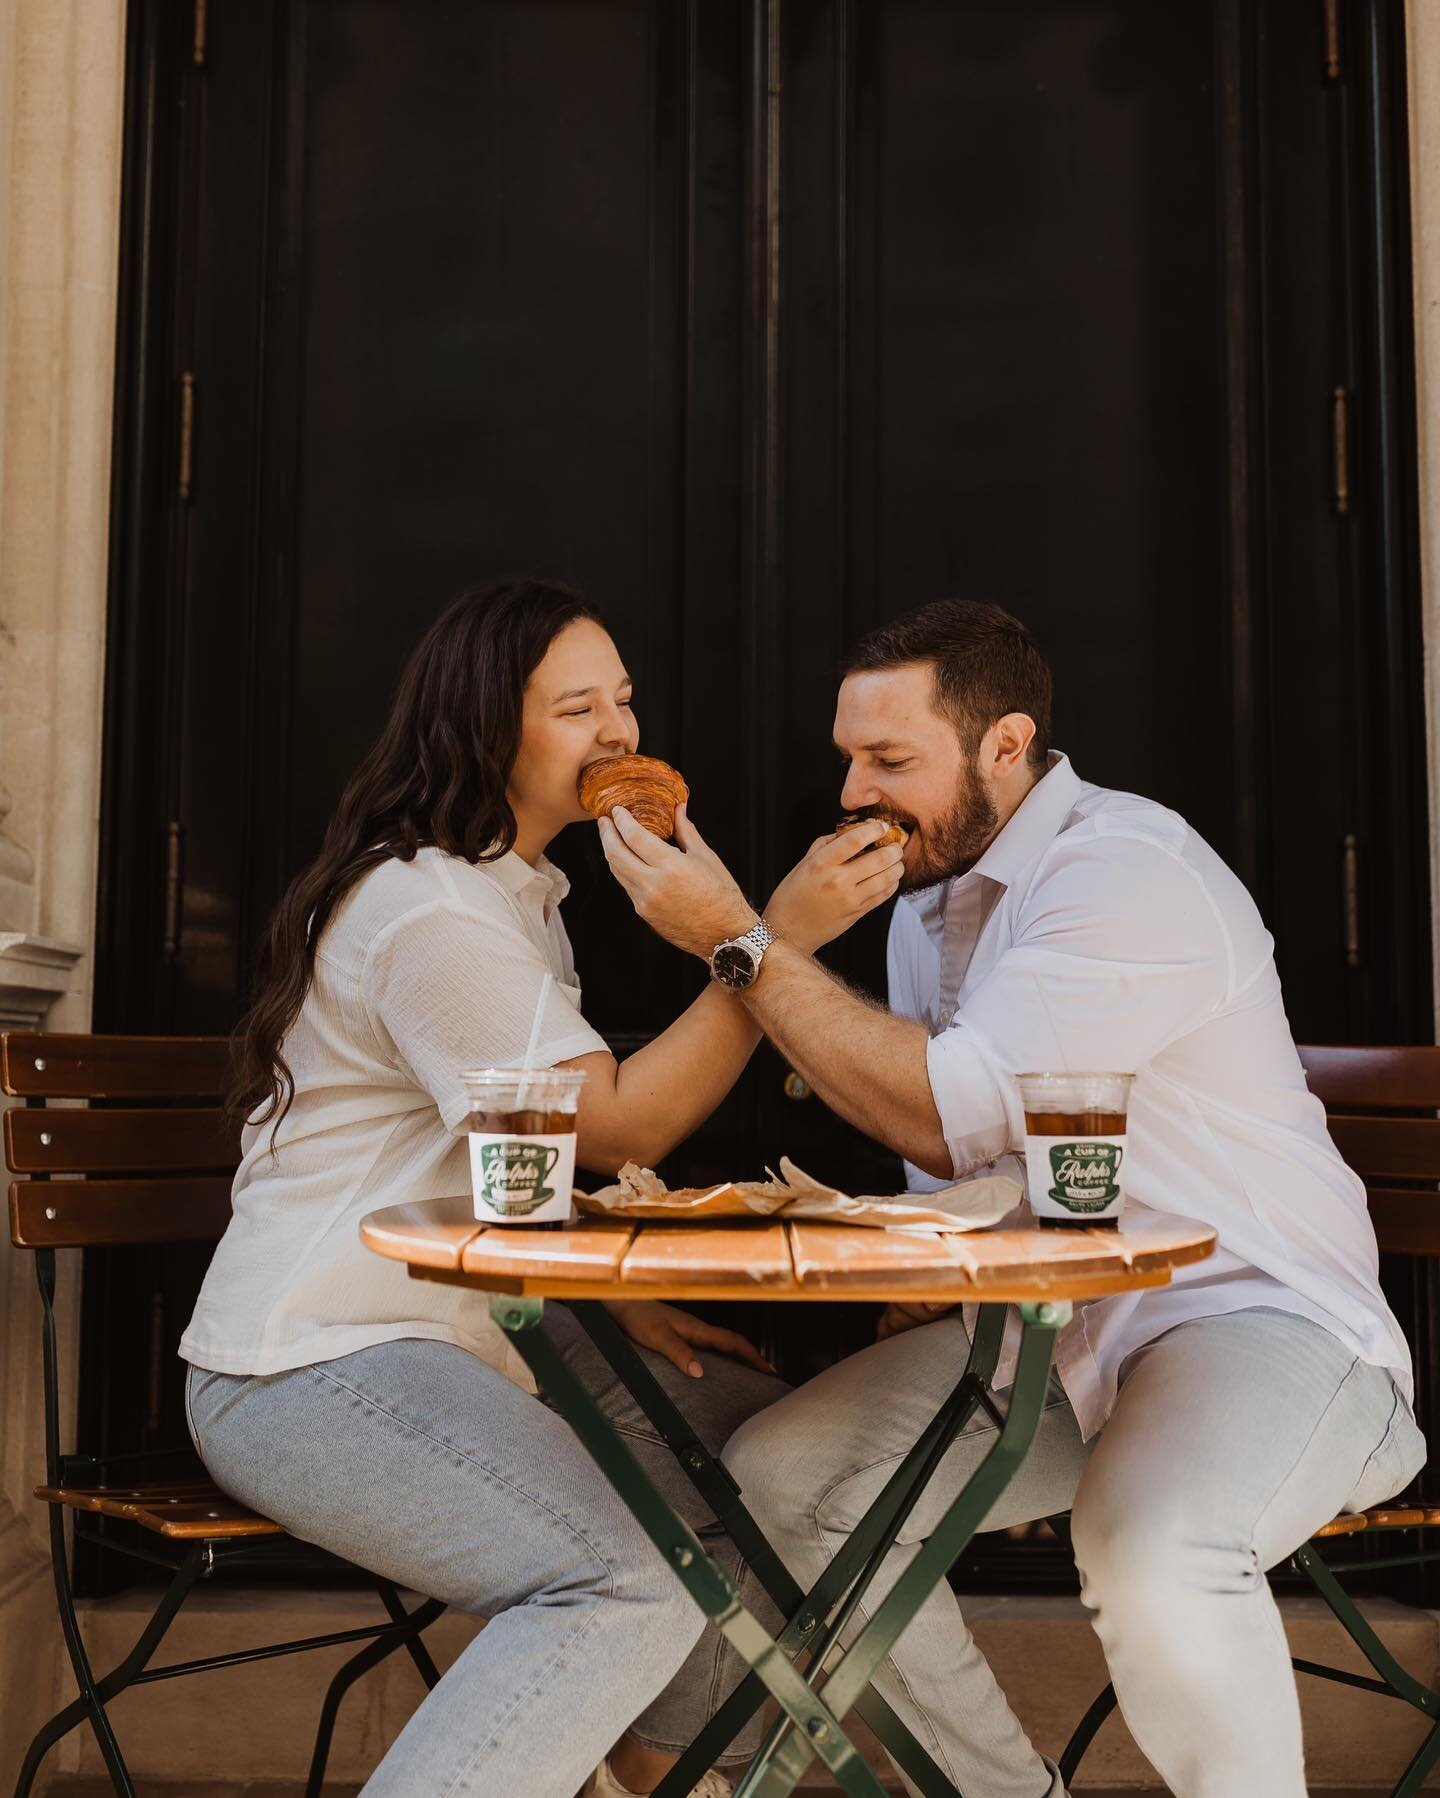 Coffee, croissants, Central Park? All you need! 

These two were a joy to photograph. They had never done a professional photo shoot before but it didn&rsquo;t matter because they were so in love and having fun that it was natural! 

If you&rsquo;d l